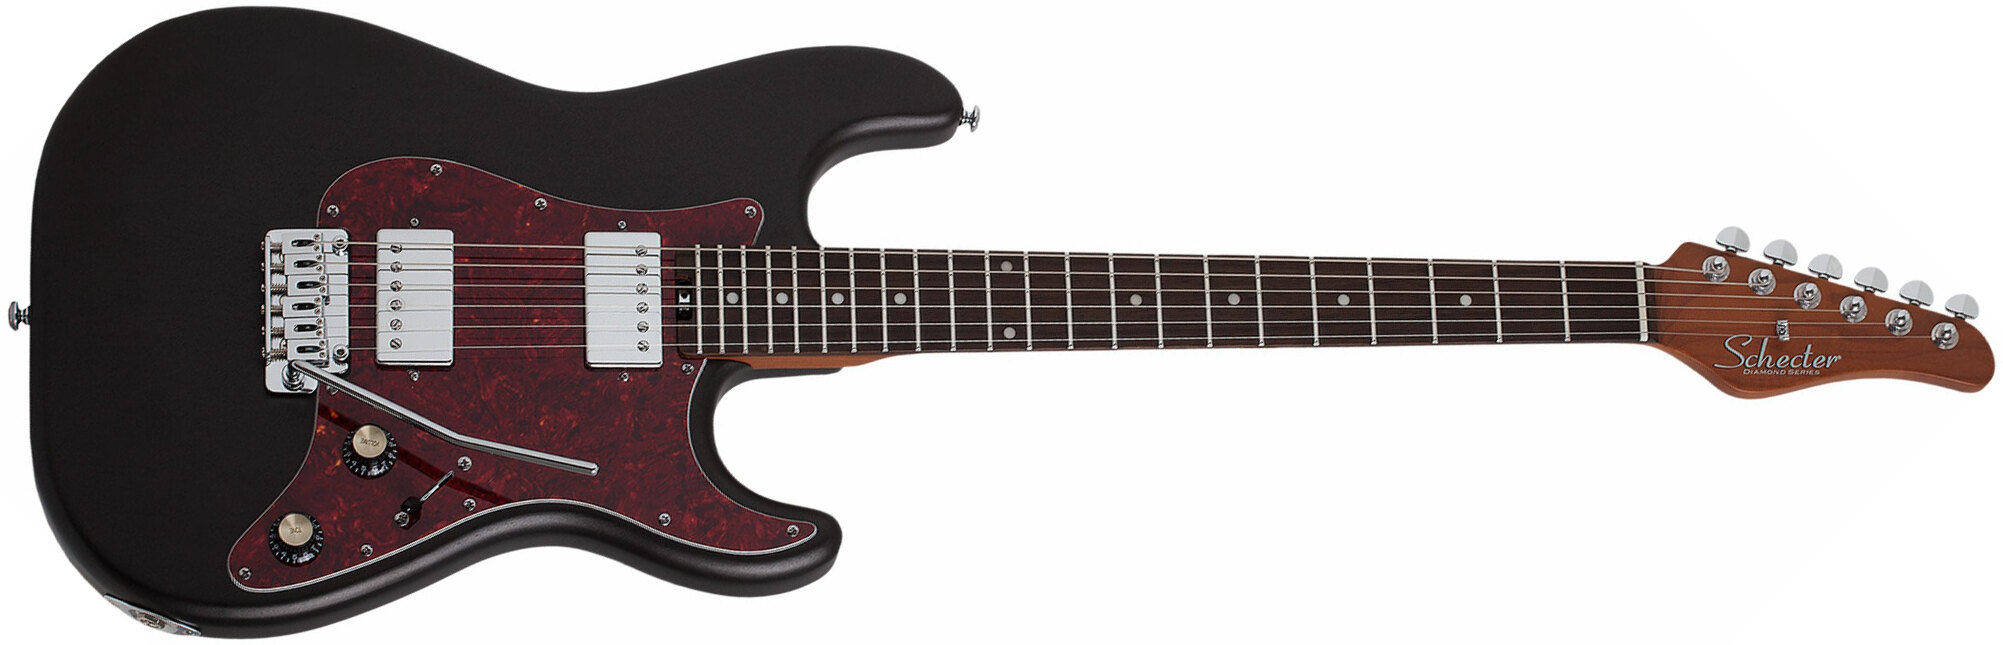 Schecter Jack Fowler Traditional Signature 2h Trem Eb - Black Pearl - Str shape electric guitar - Main picture